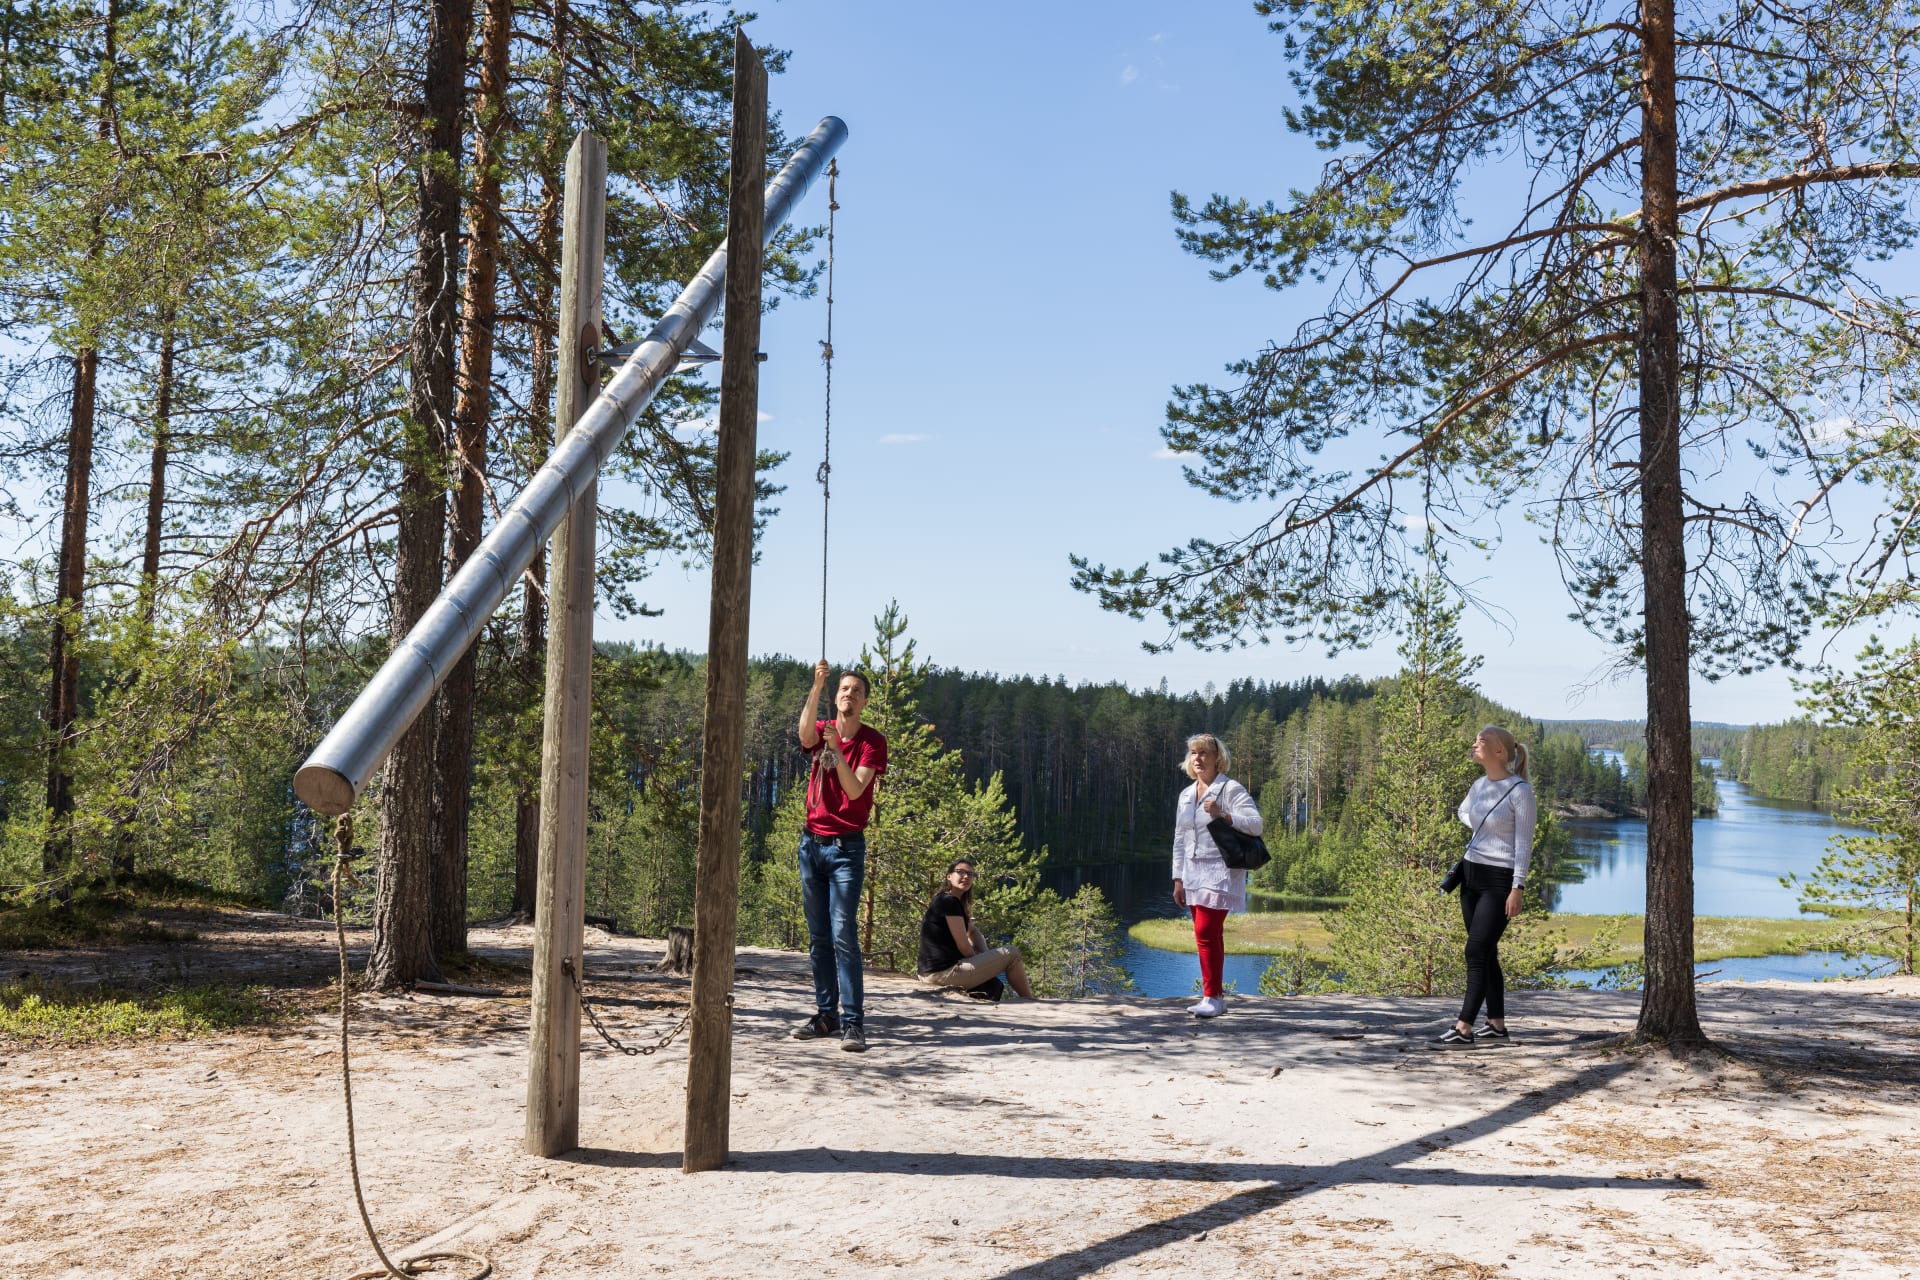 The instruments of Musical Forest are located on a sand esker